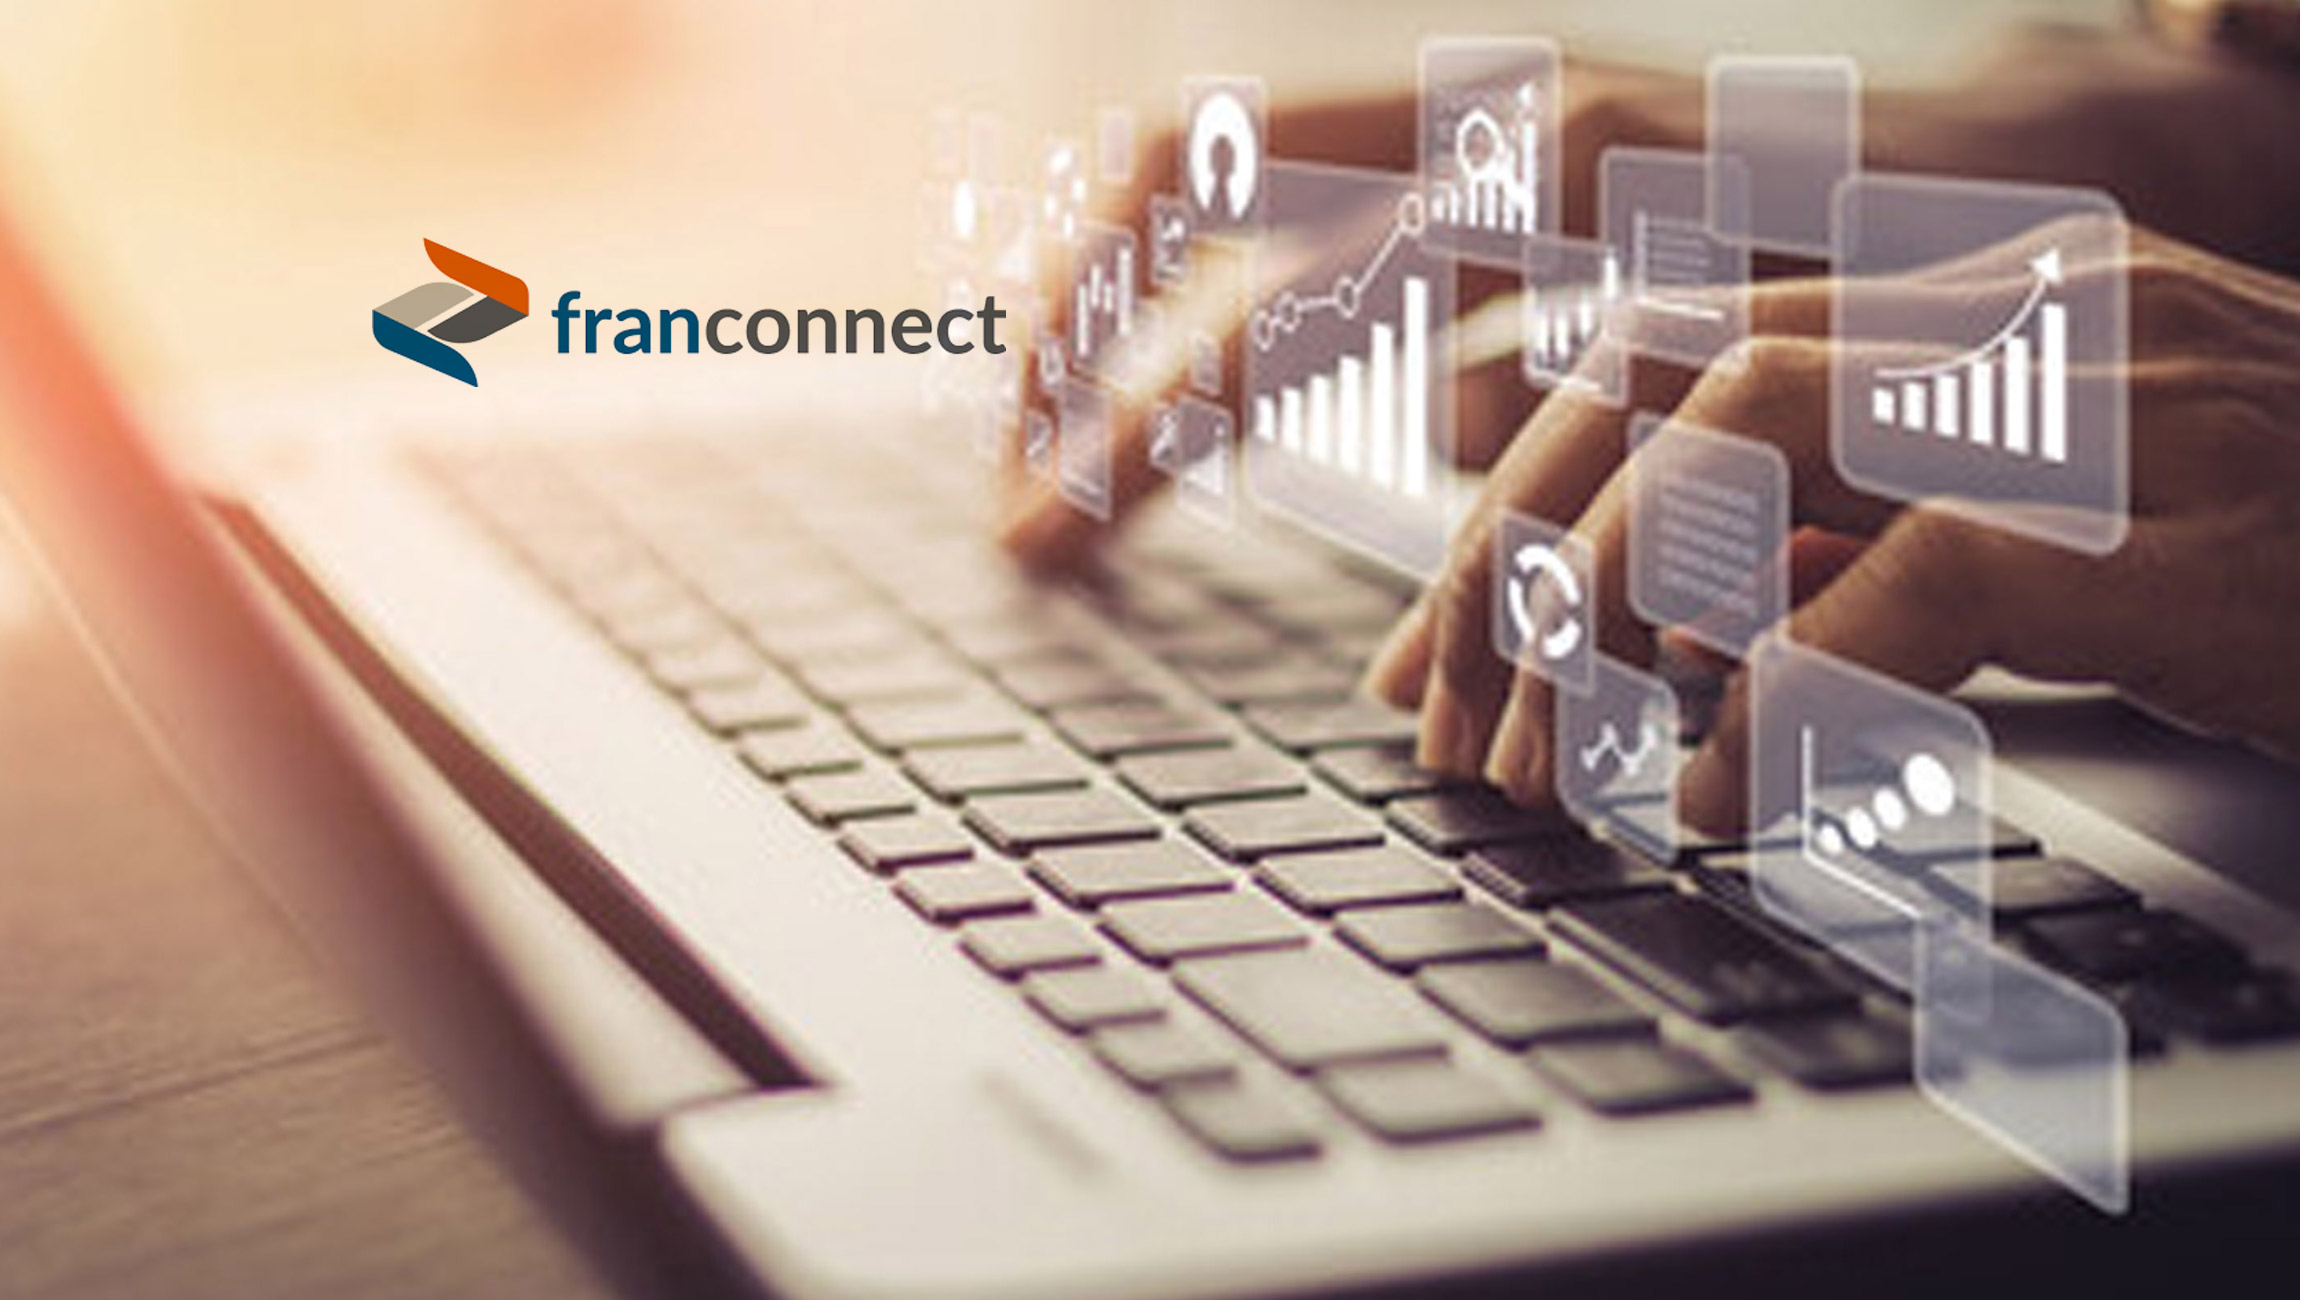 FranConnect Launches Franchise Scorecards to Equip Brands with Powerful Technology to Drive Unit-level Economics